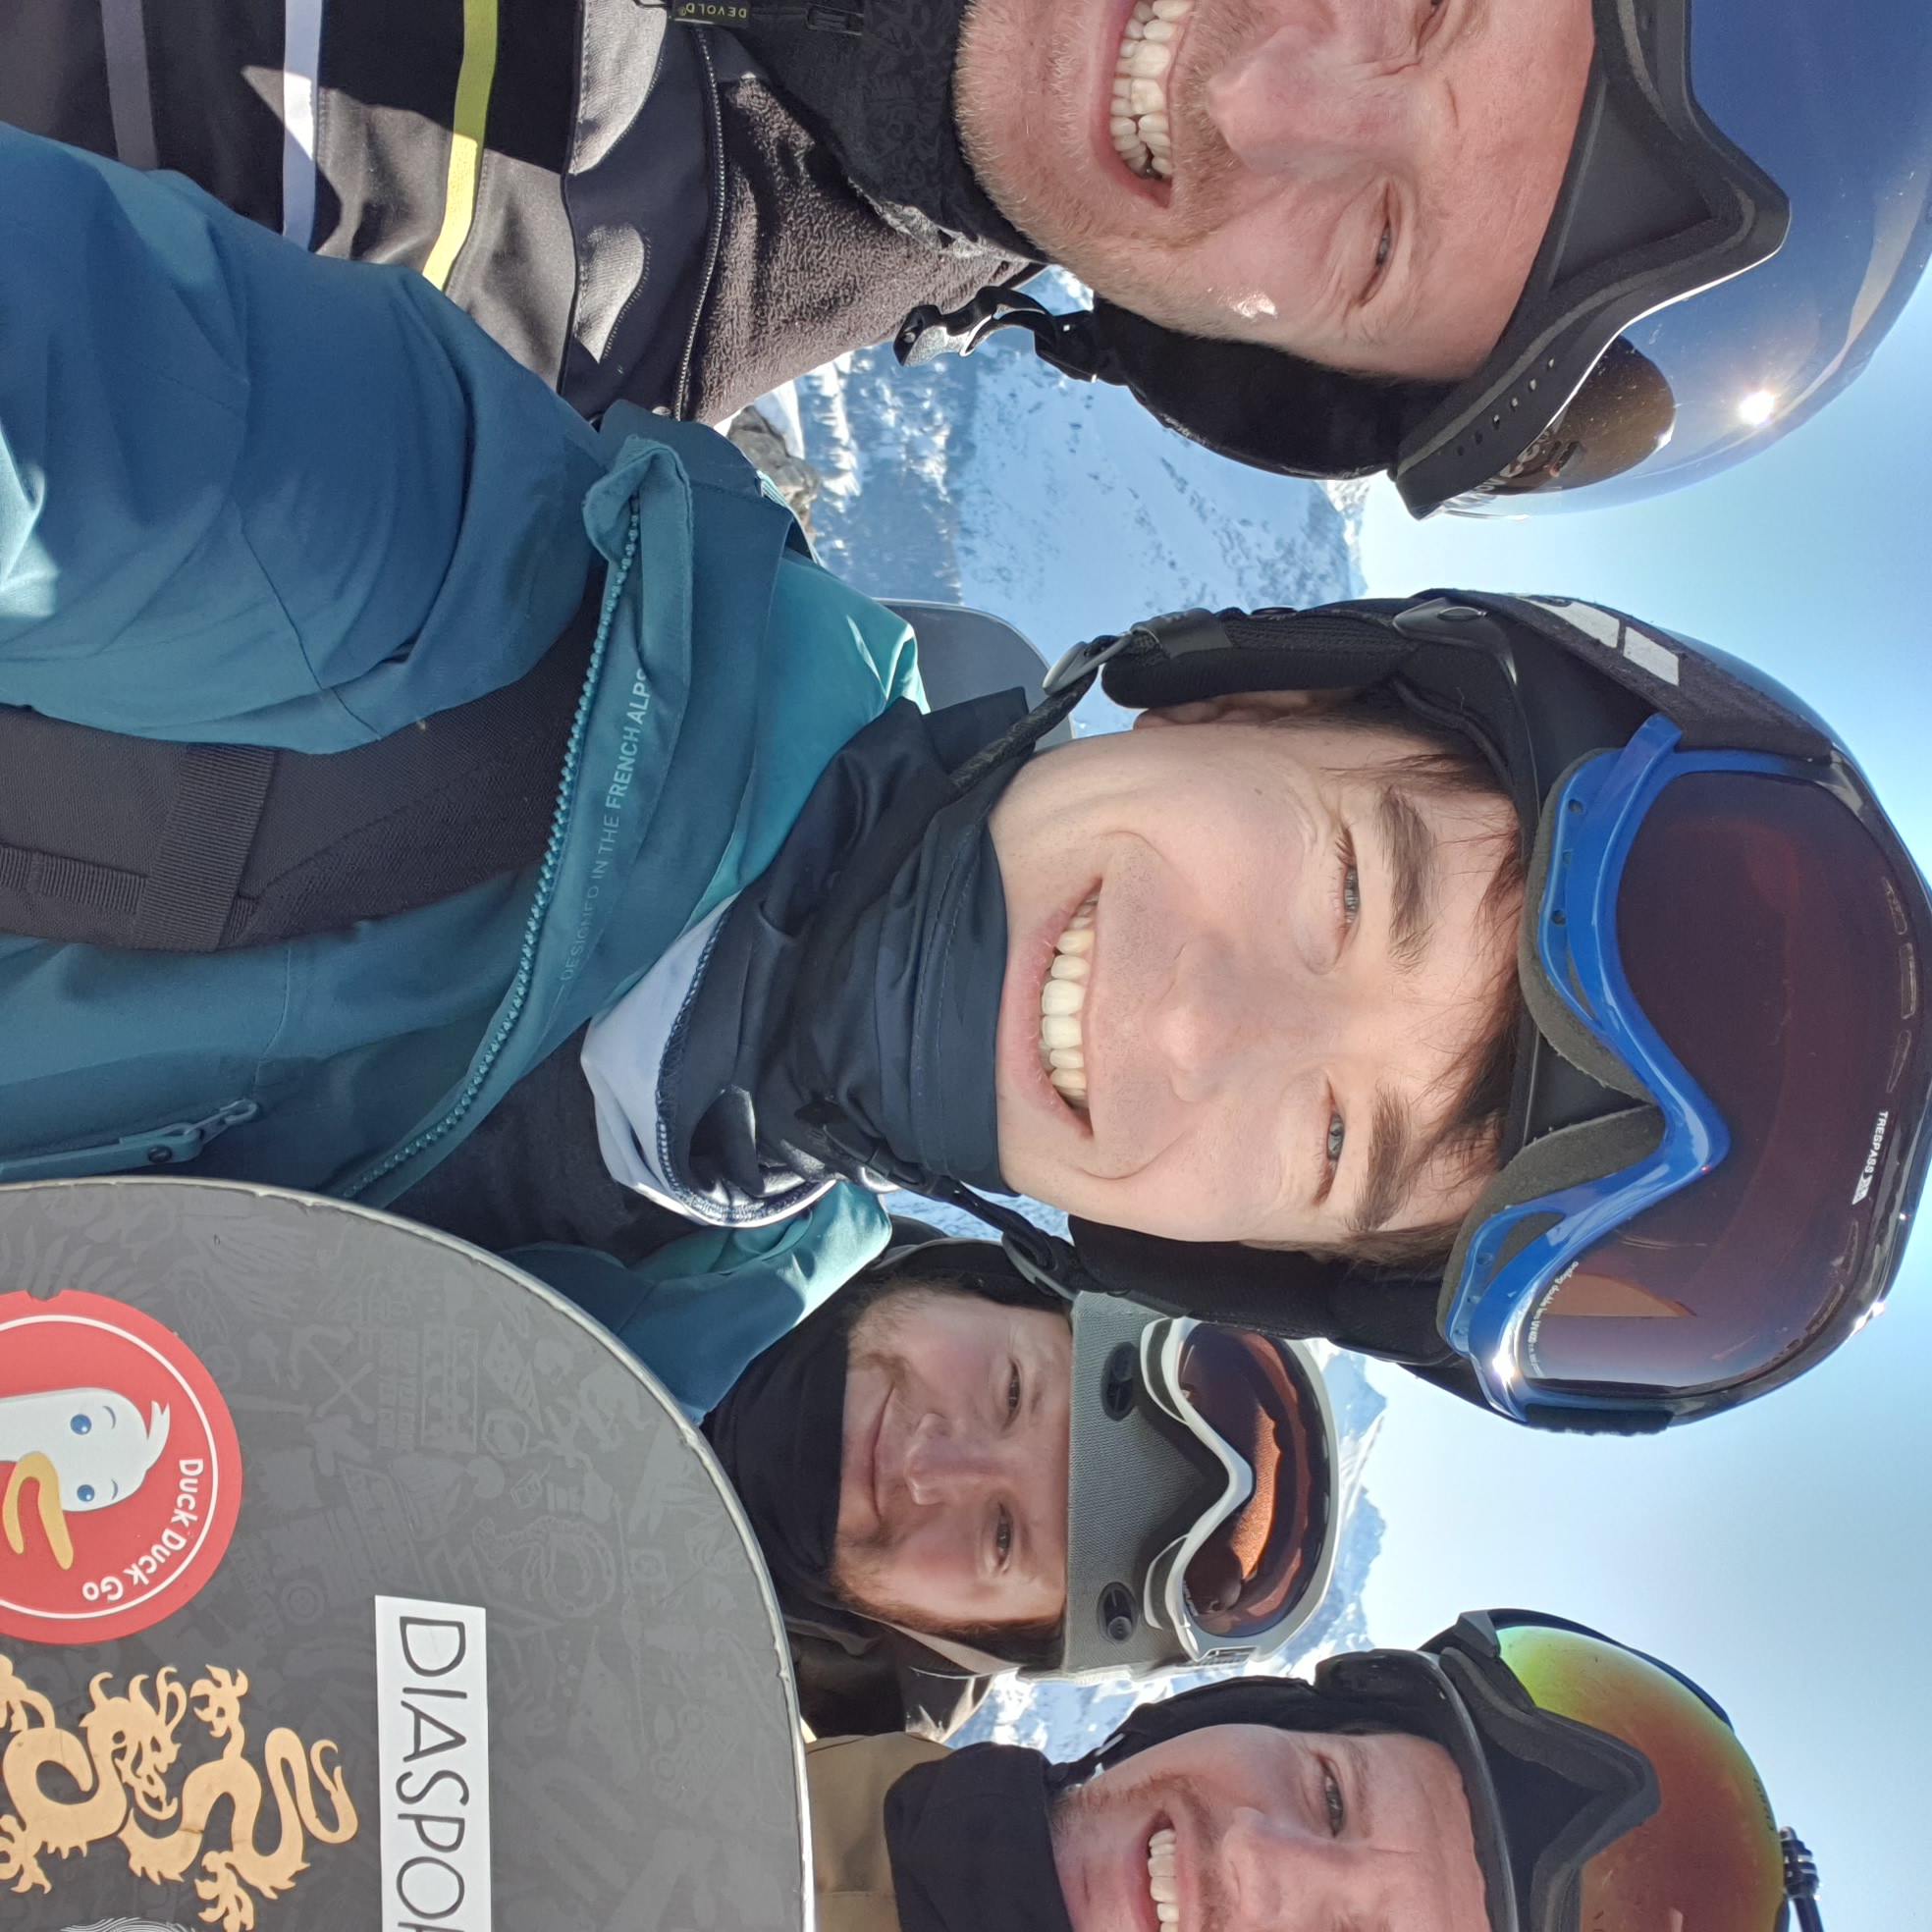 group photo with people dressed in ski gear on a sunnyday